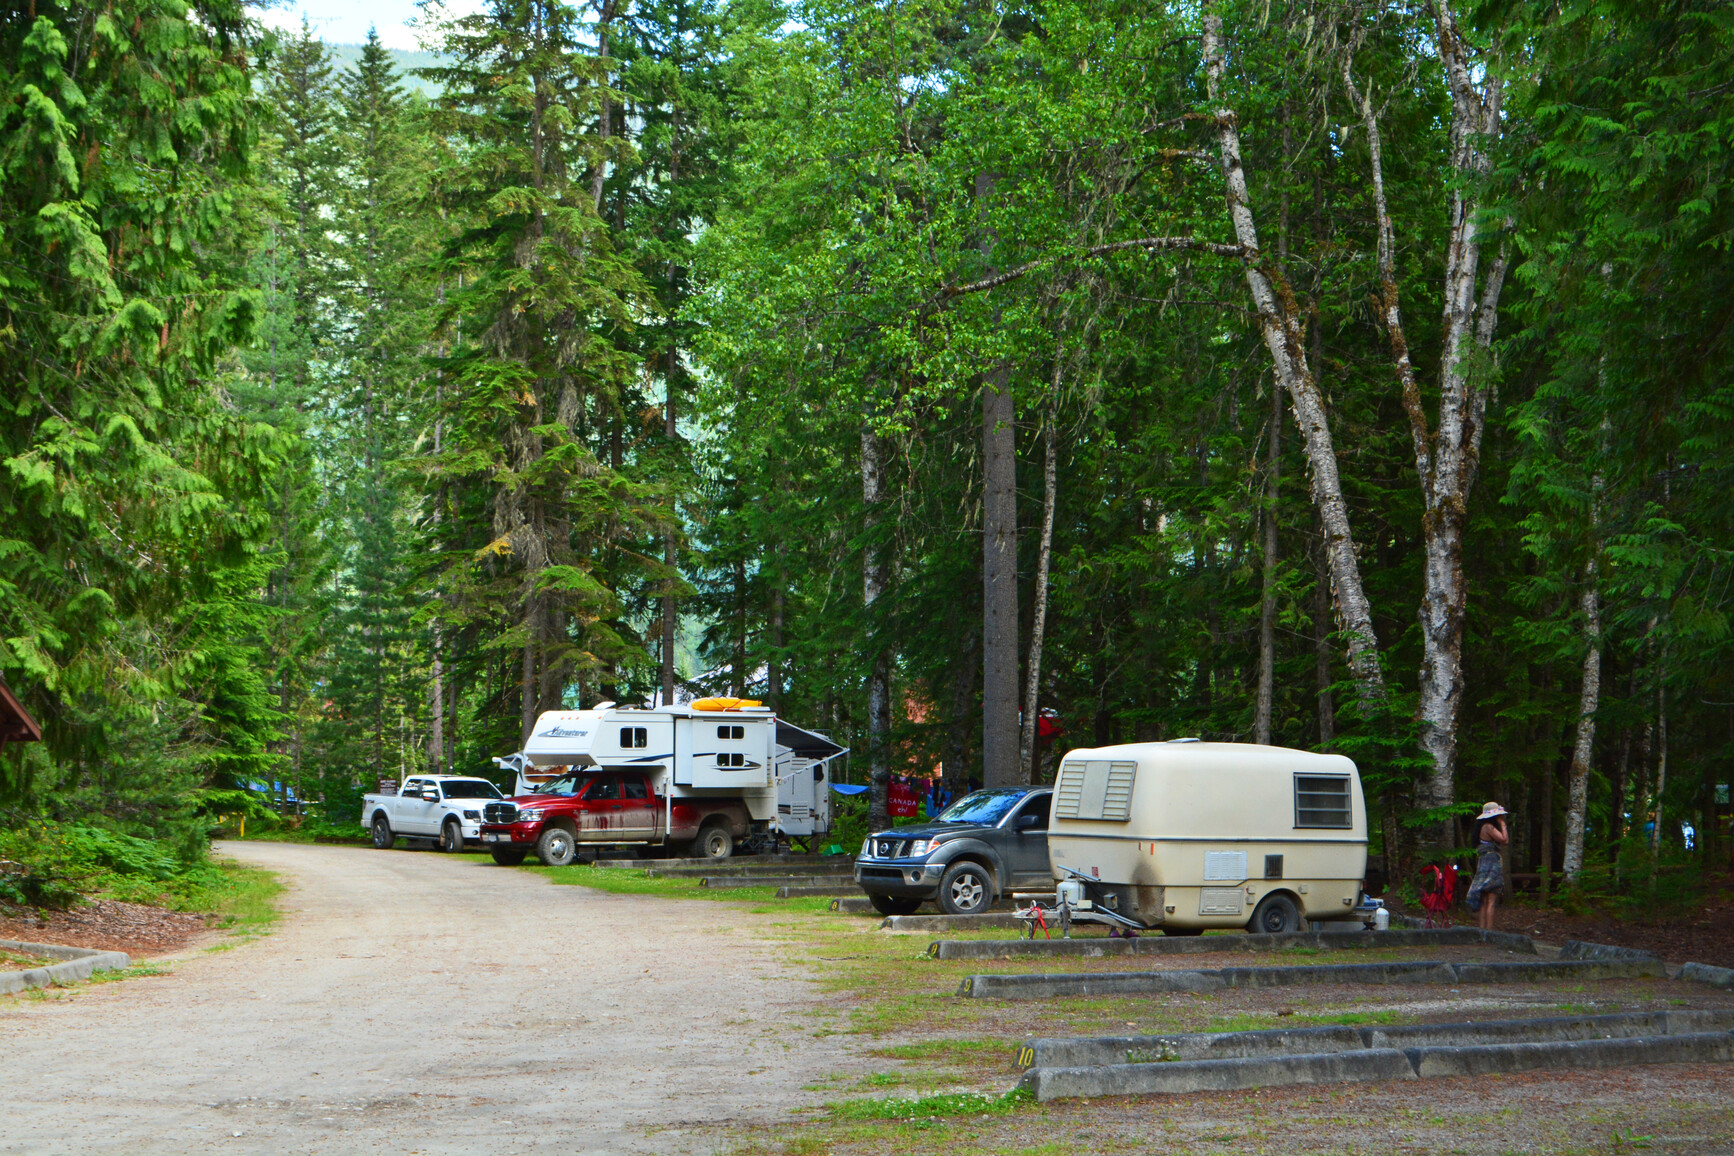 The parking area for the campground at Silver Beach Park.